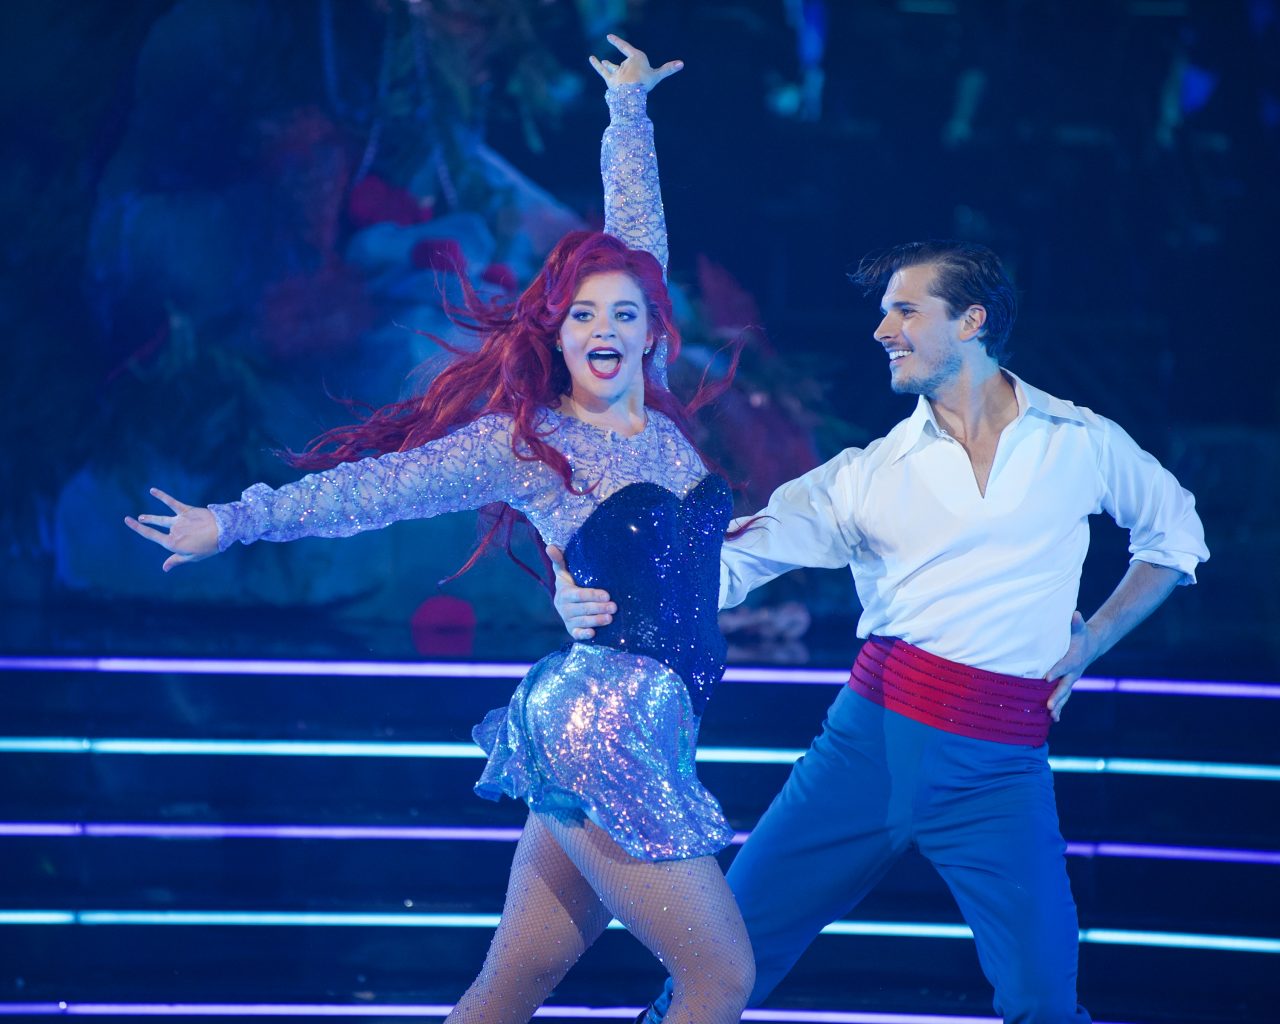 Dancing with the Stars: Lauren Alaina Goes ‘Under the Sea’ on Disney Night